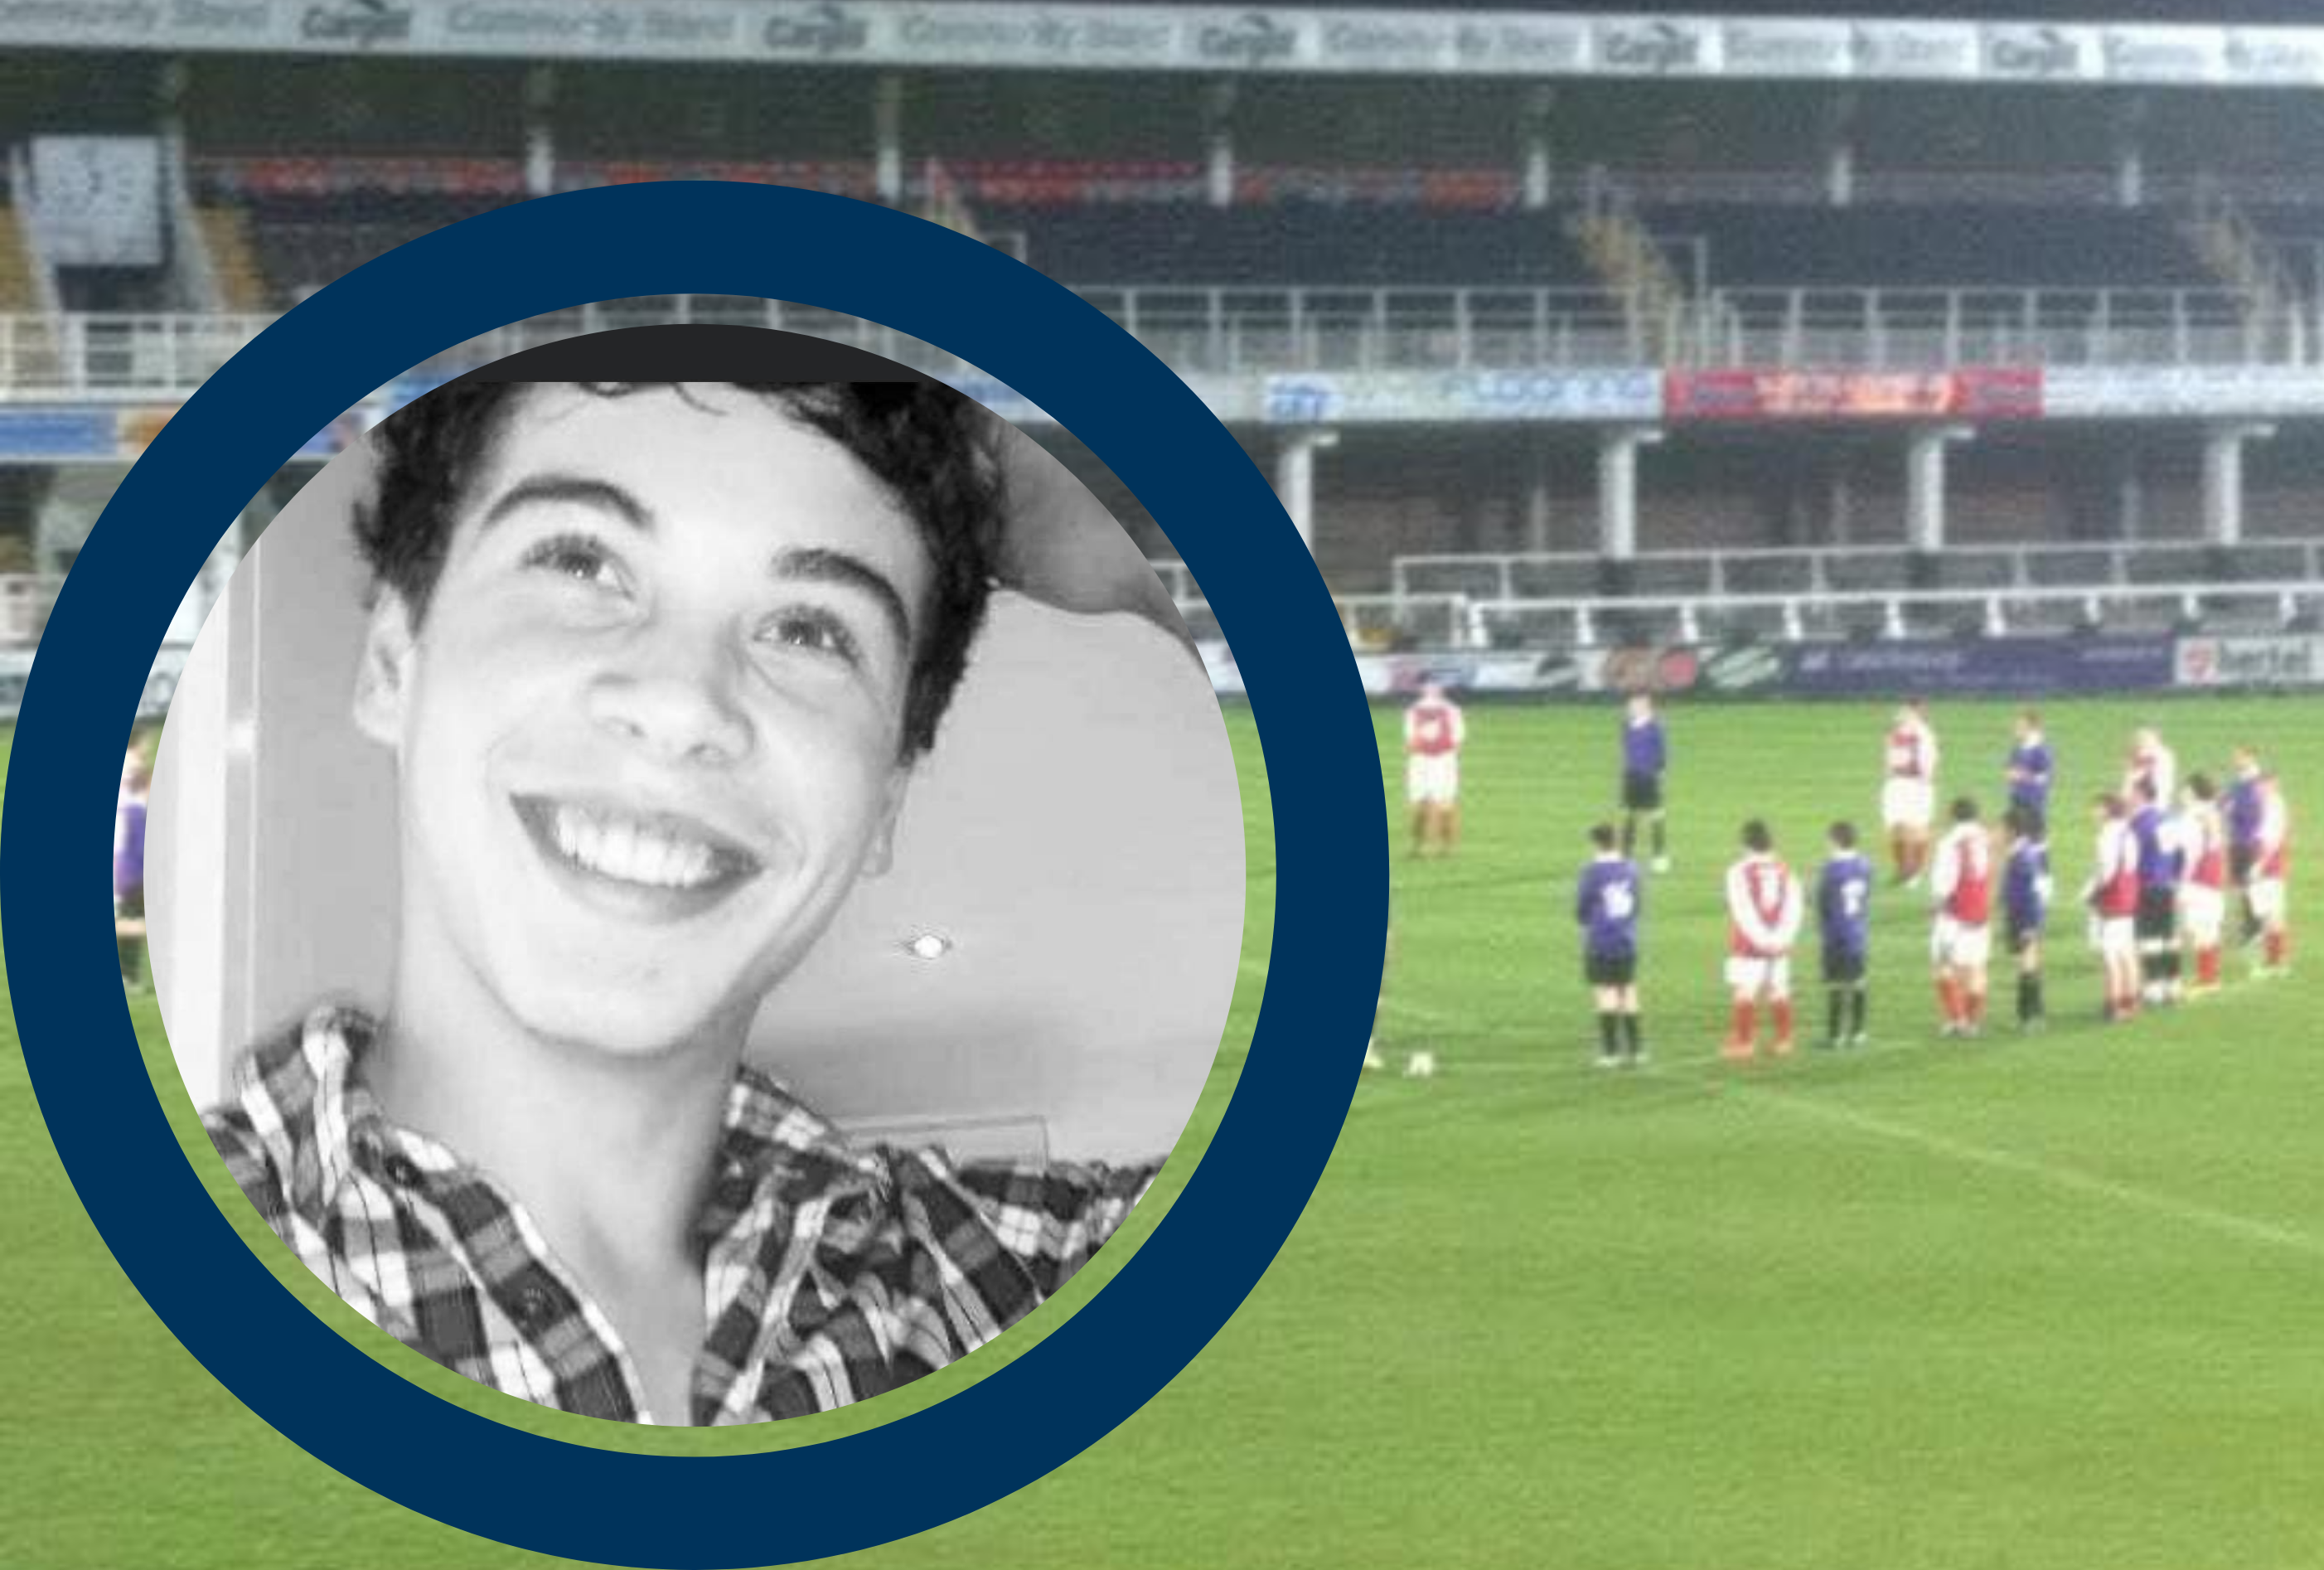 NEWS | Memorial match to mark ten years since Herefordshire teenager died